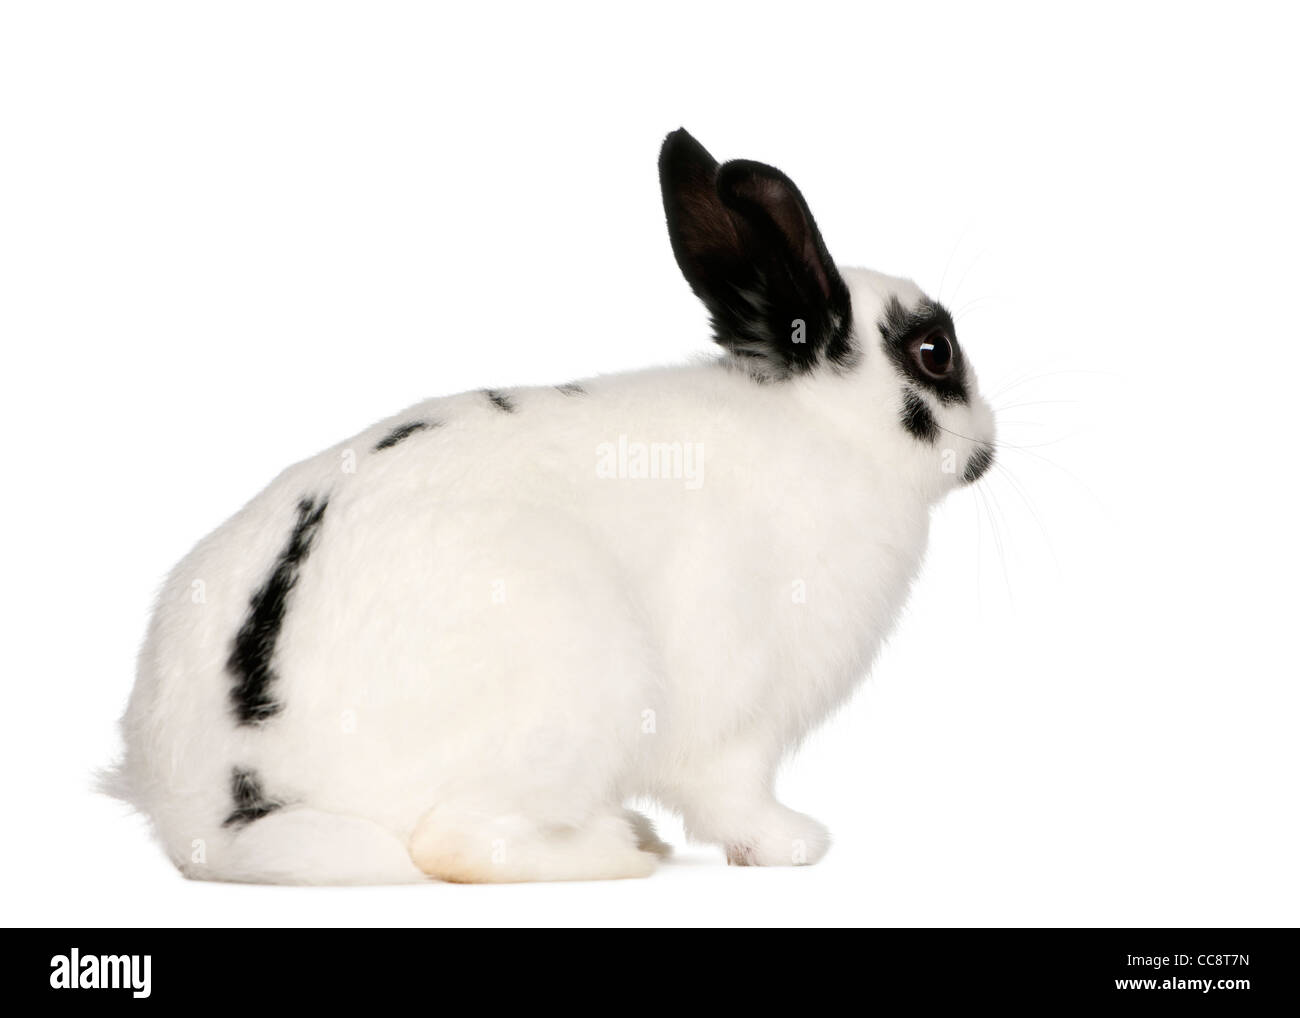 Dalmatian rabbit, 2 months old, Oryctolagus cuniculus, in front of white background Stock Photo